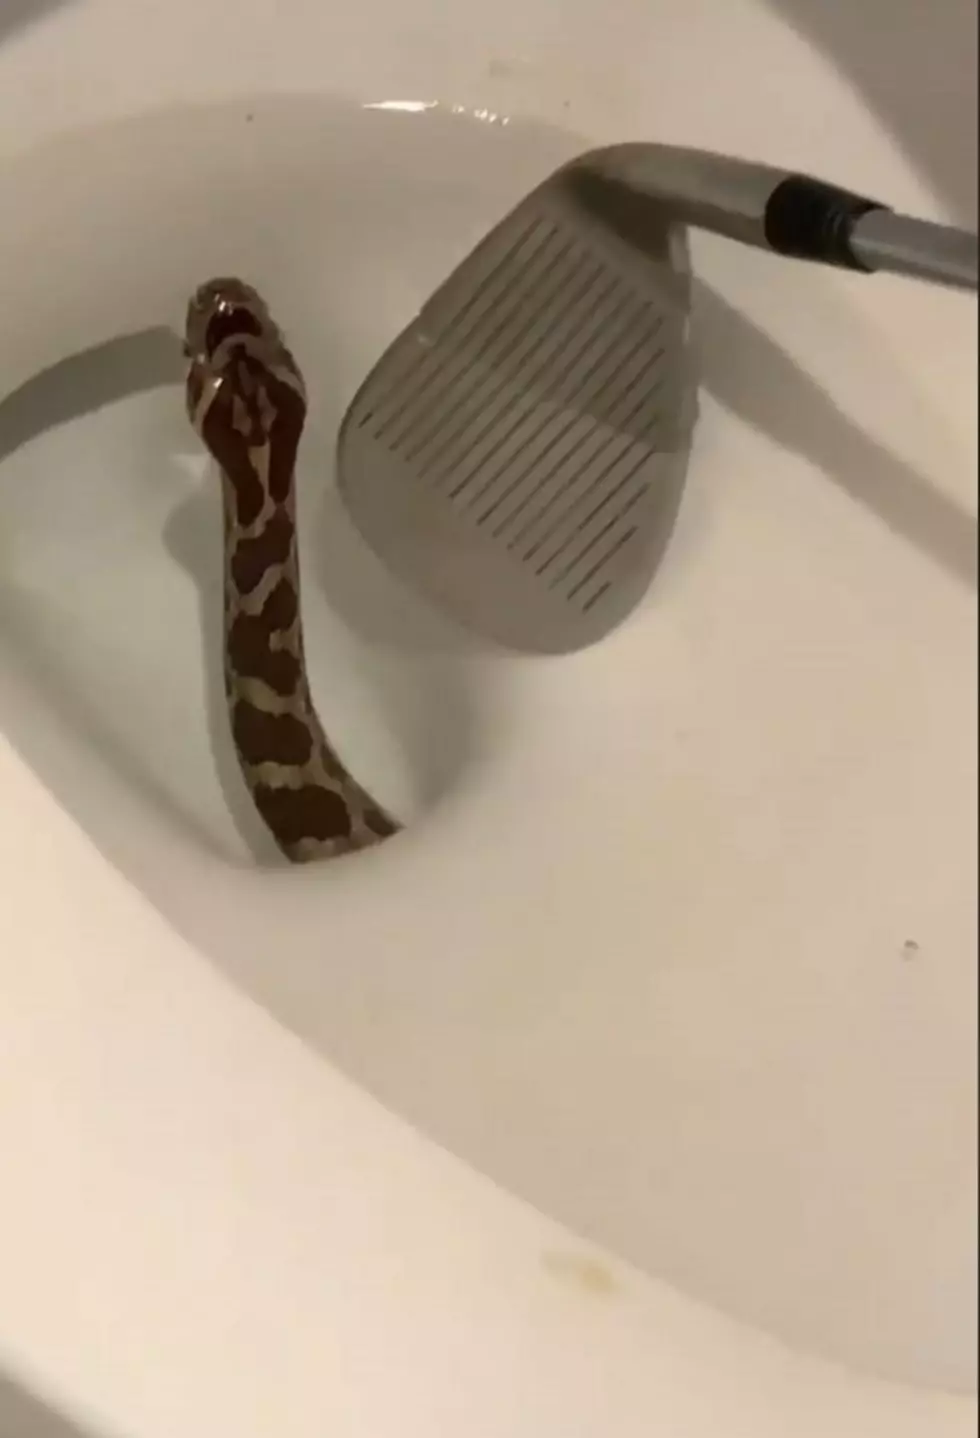 Video Shows Snake Hiding in Toilet